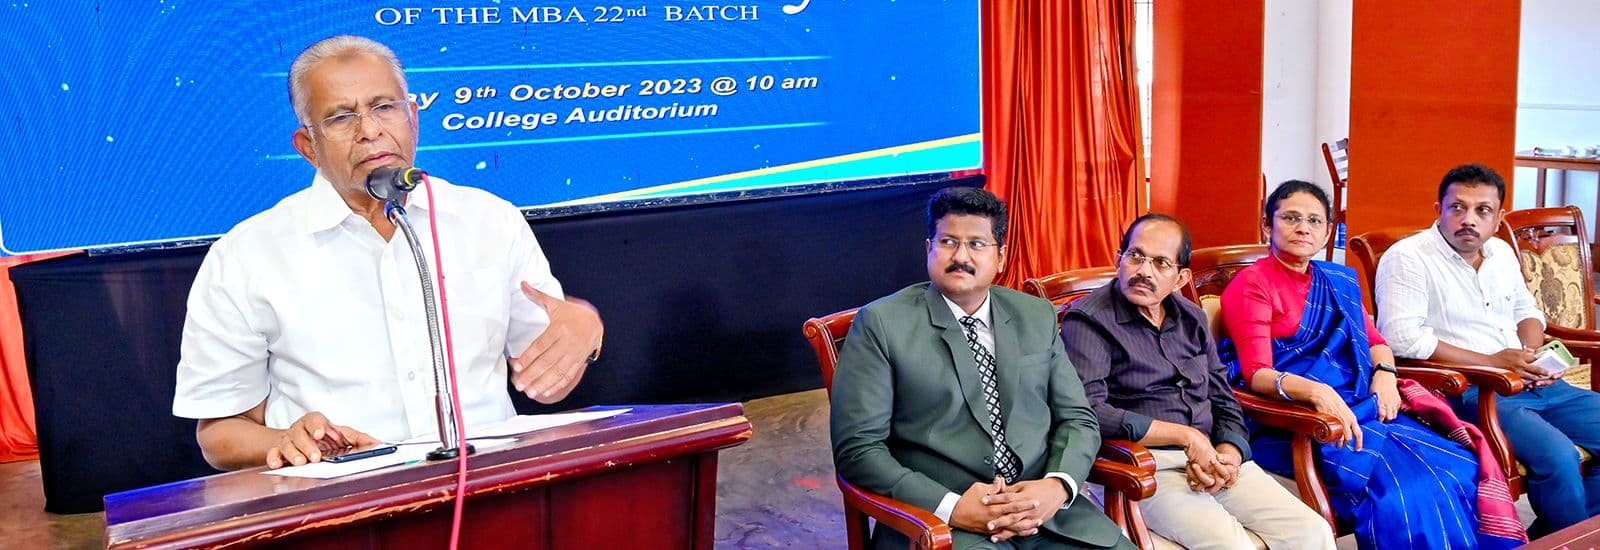 INAUGURATION OF THE MBA 22nd BATCH BY Jb. E.T.MOHAMMED BASHEER, MP-PONNANI